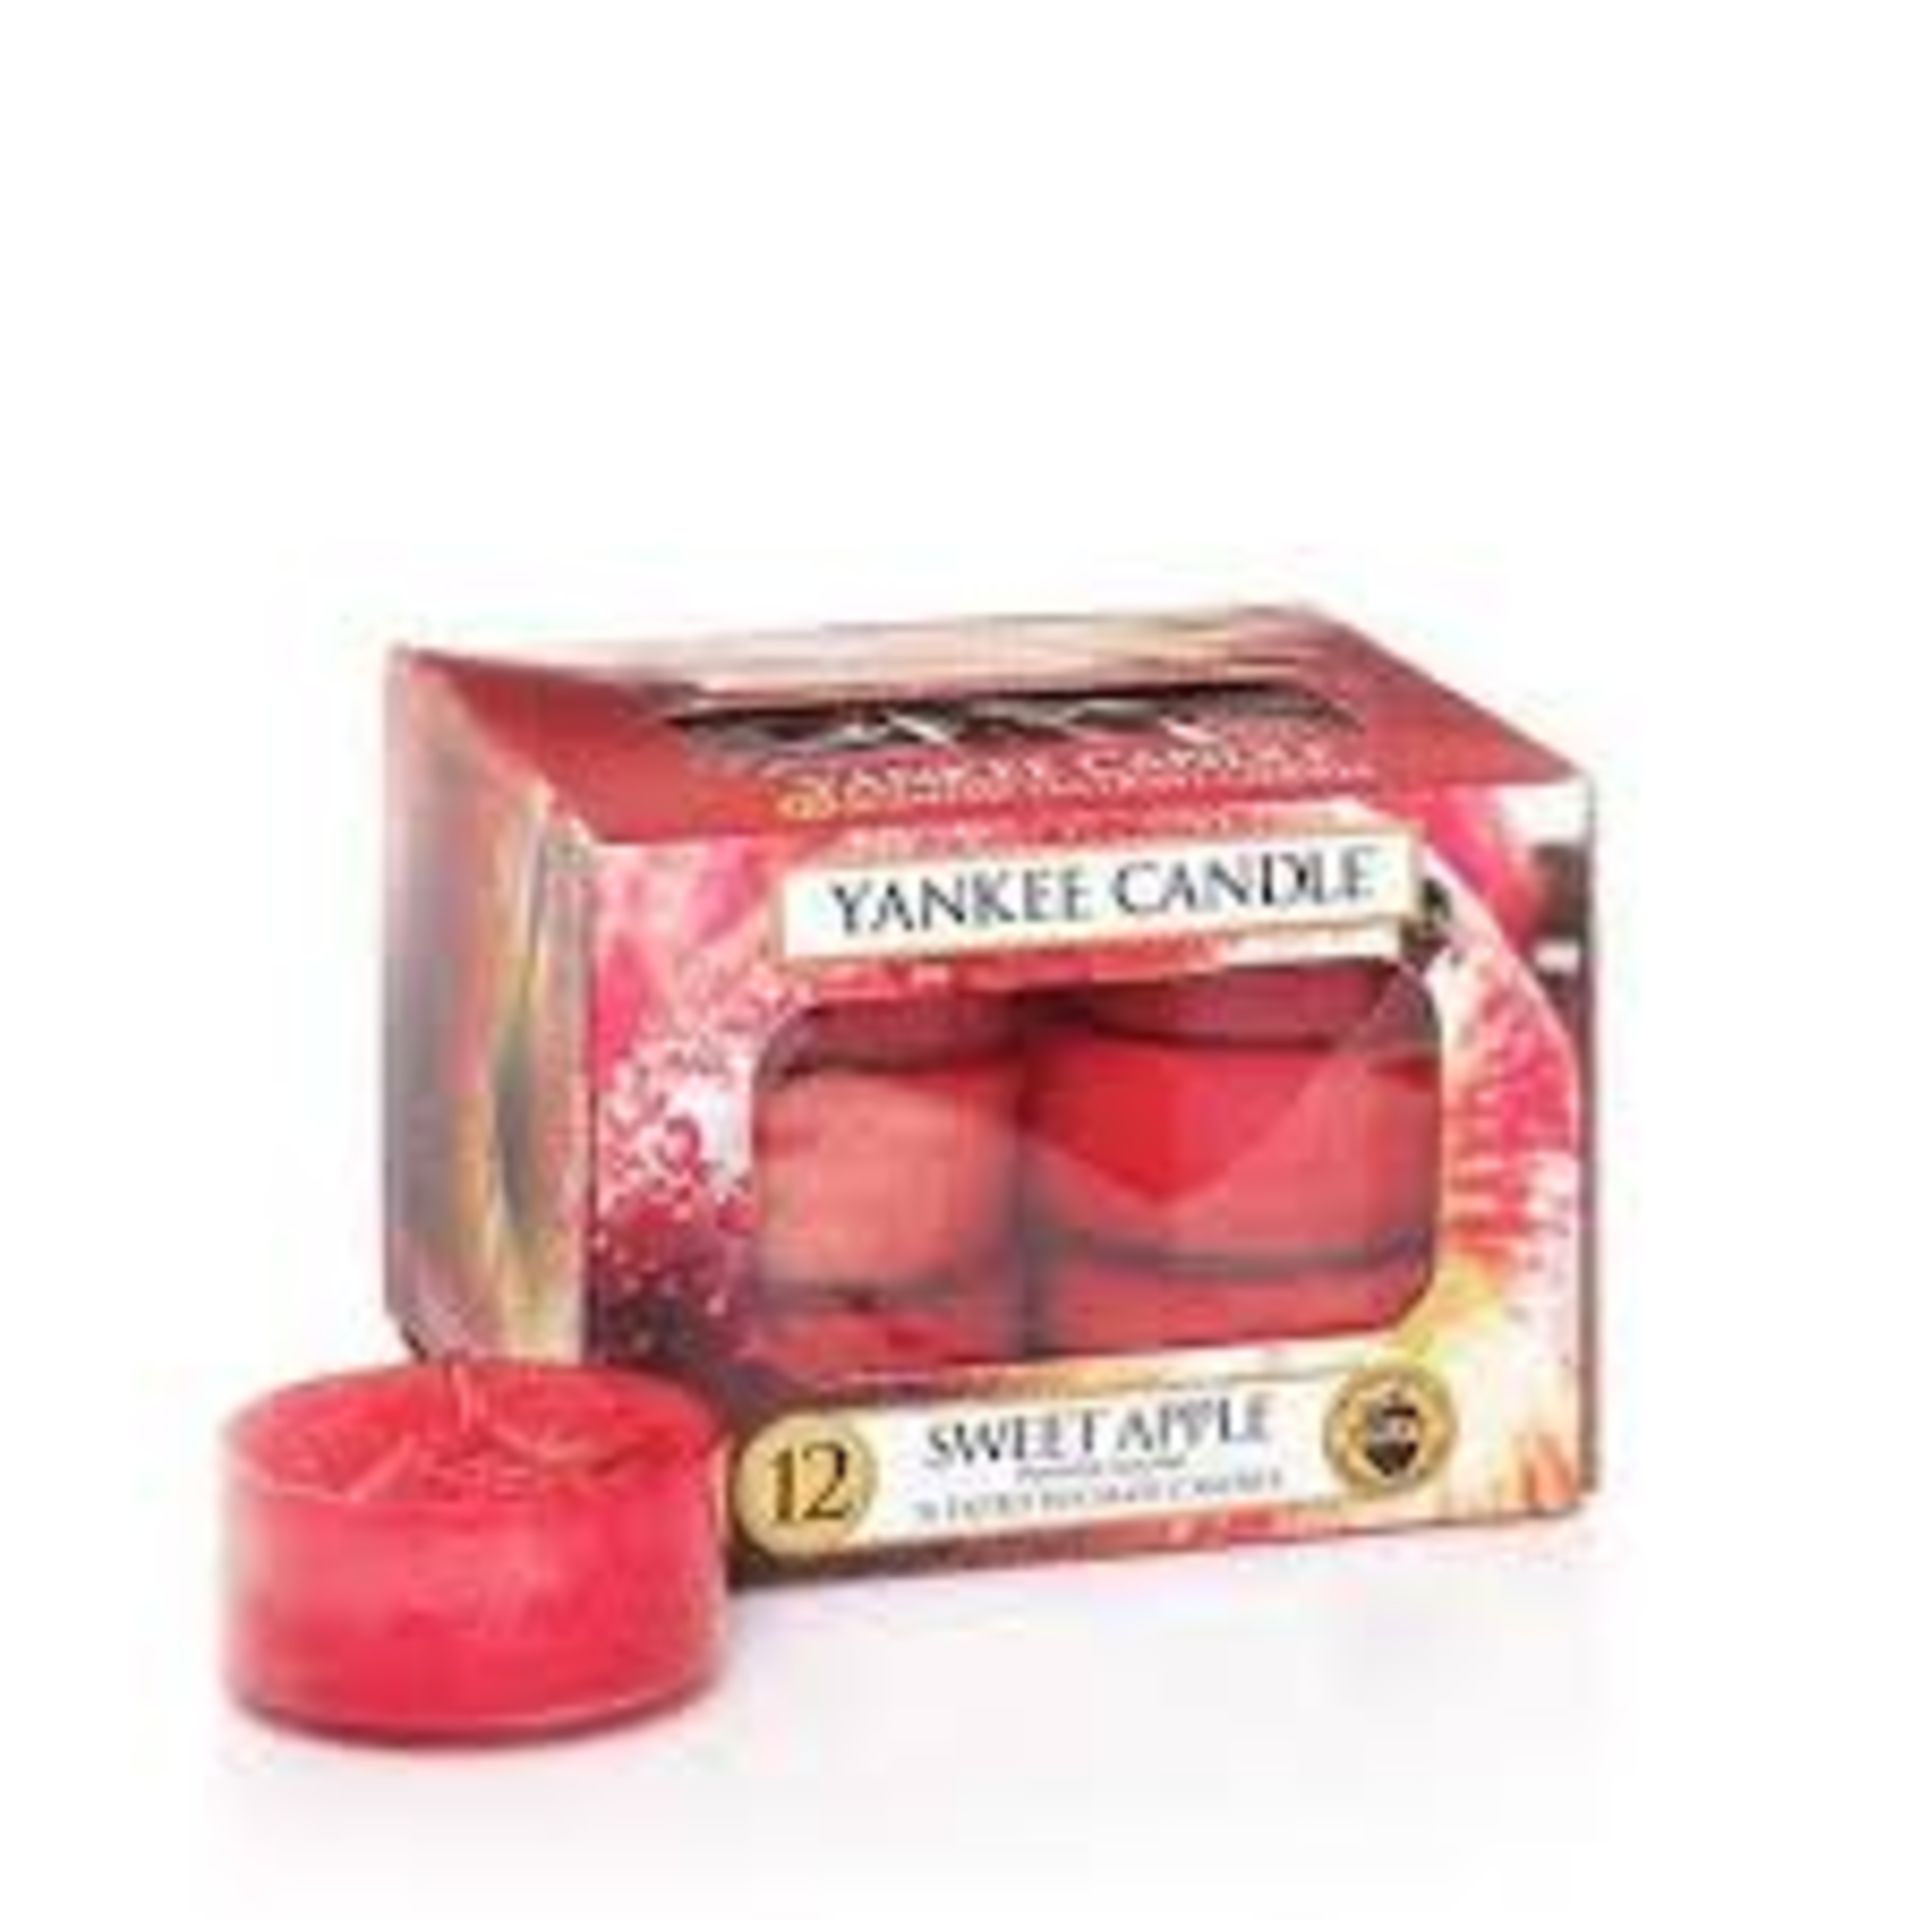 V Brand New 12 Yankee Candle Scented Tea Light Candles Sweet Apple eBay Price £6.99 X 2 YOUR BID